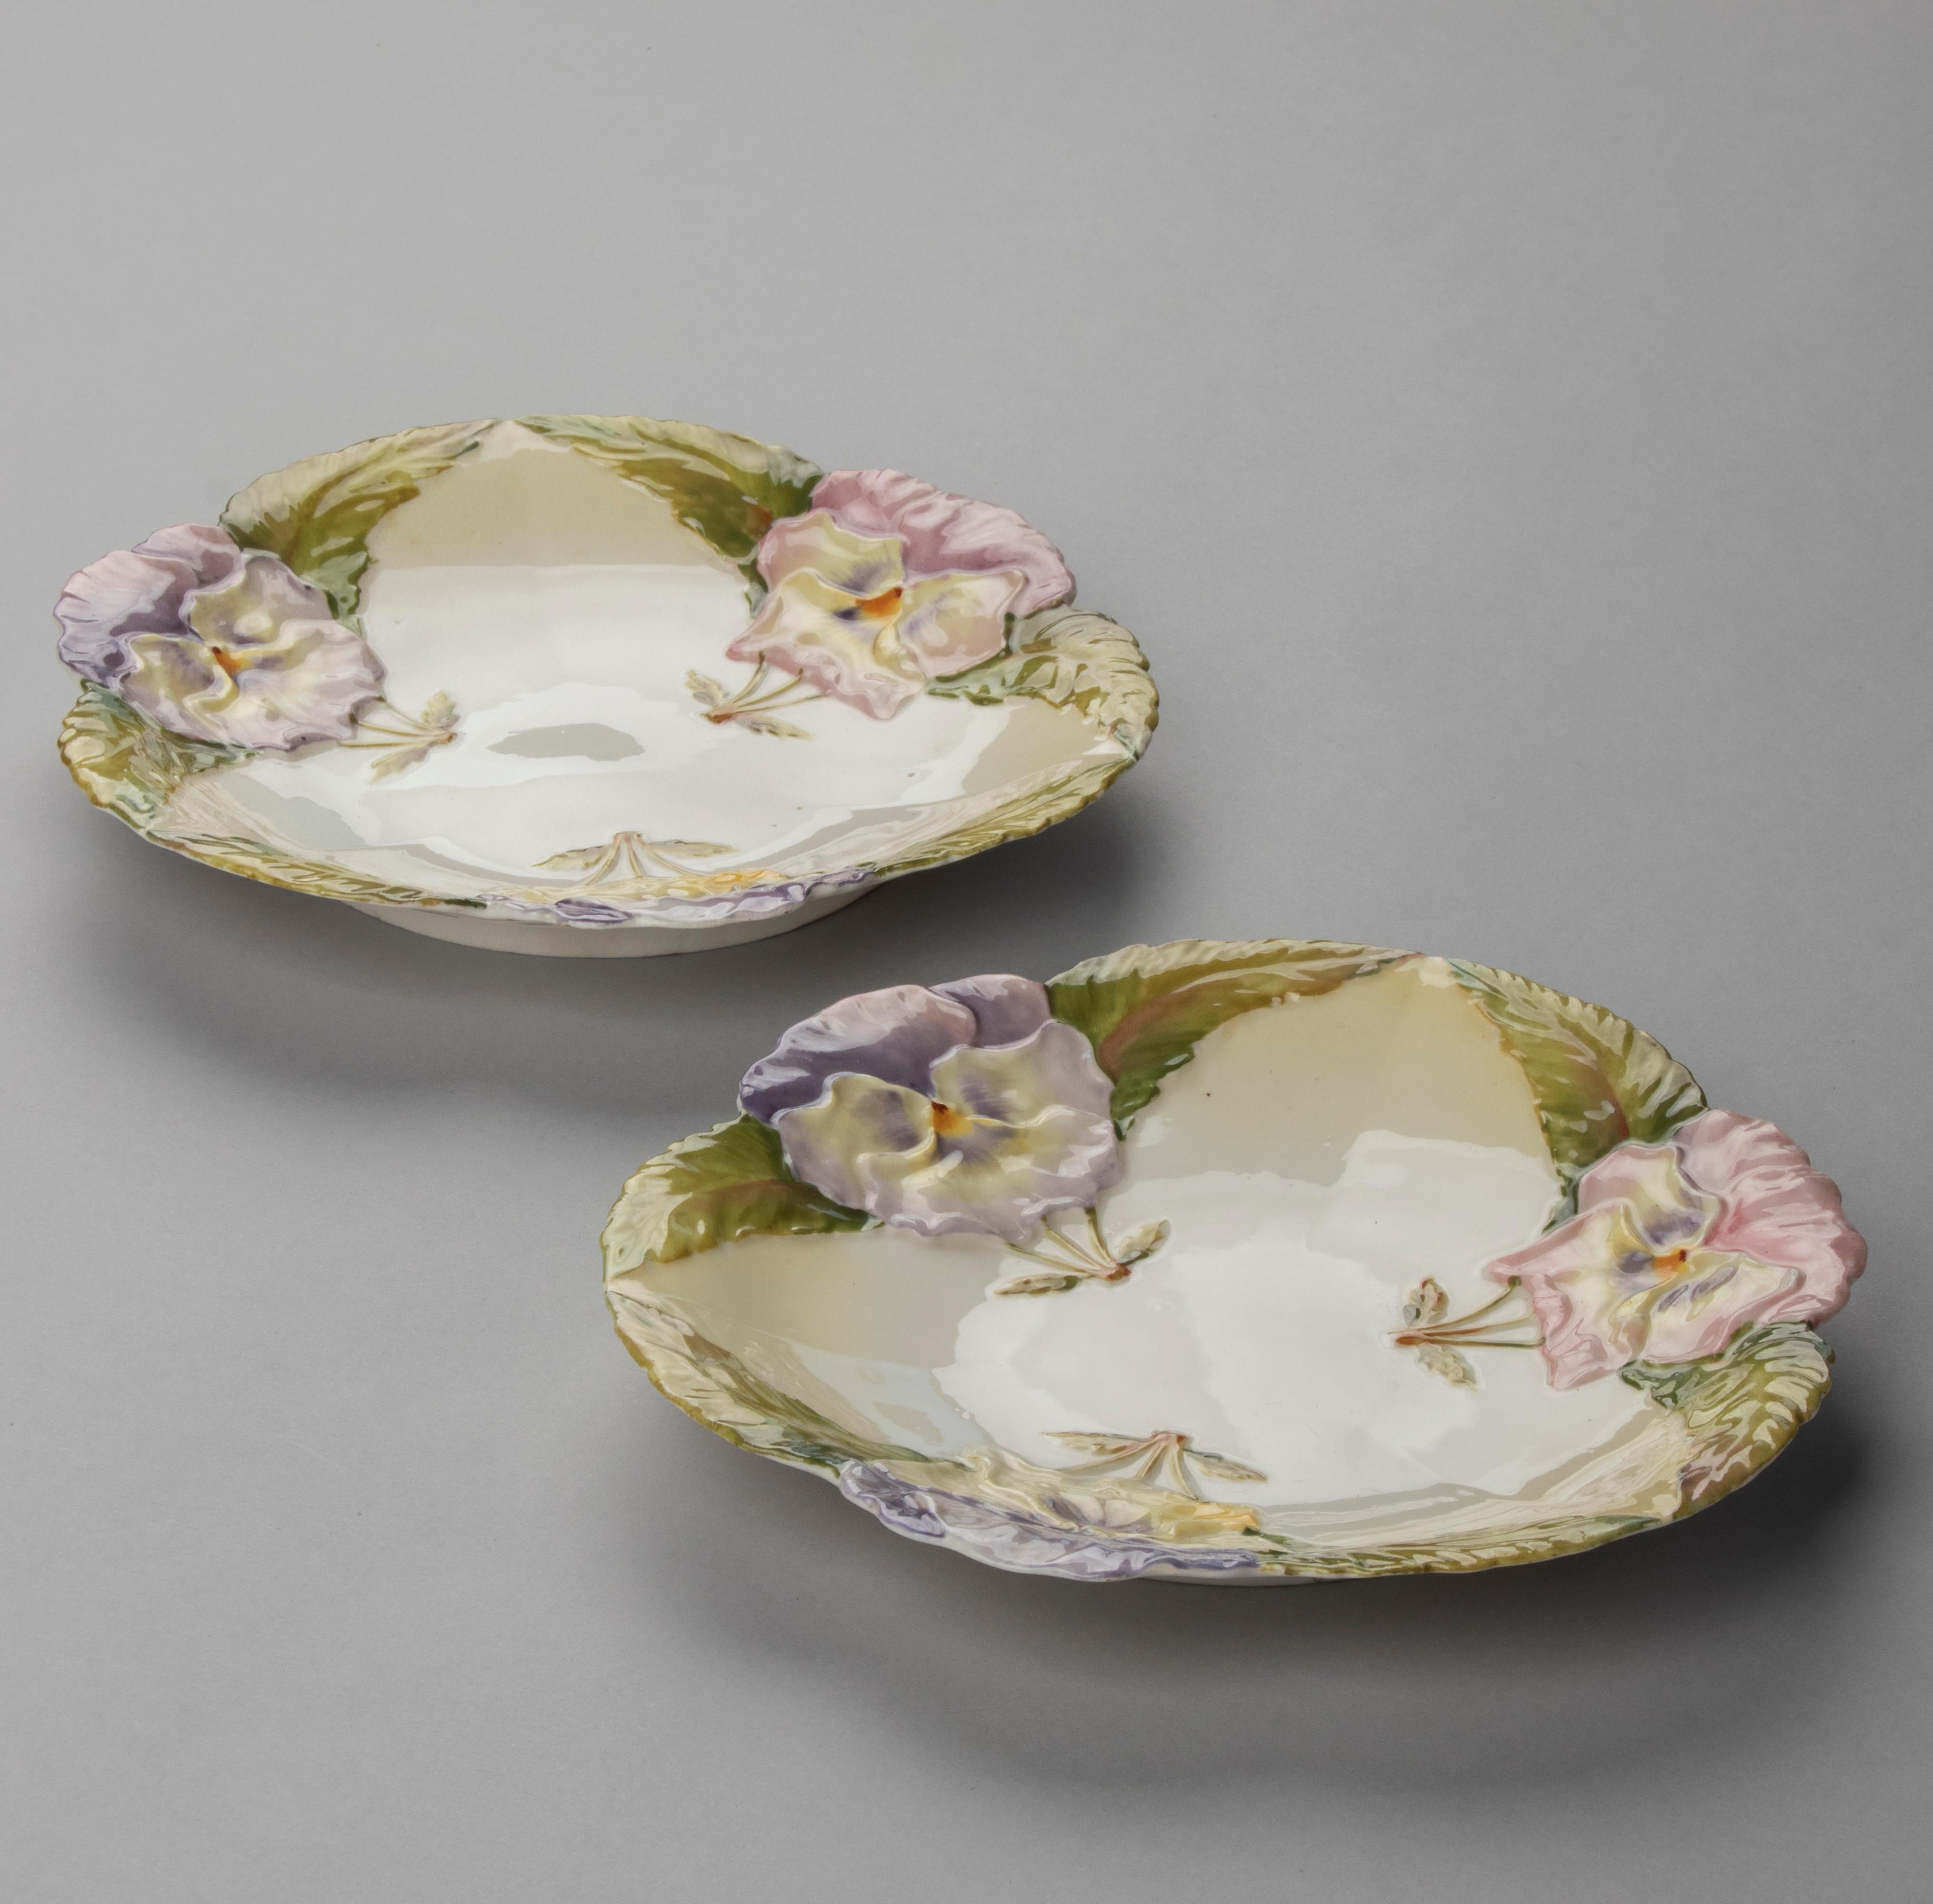 Pair of 19th Century Majolica Plates Decorated with Flowers In Good Condition For Sale In Casteren, Noord-Brabant